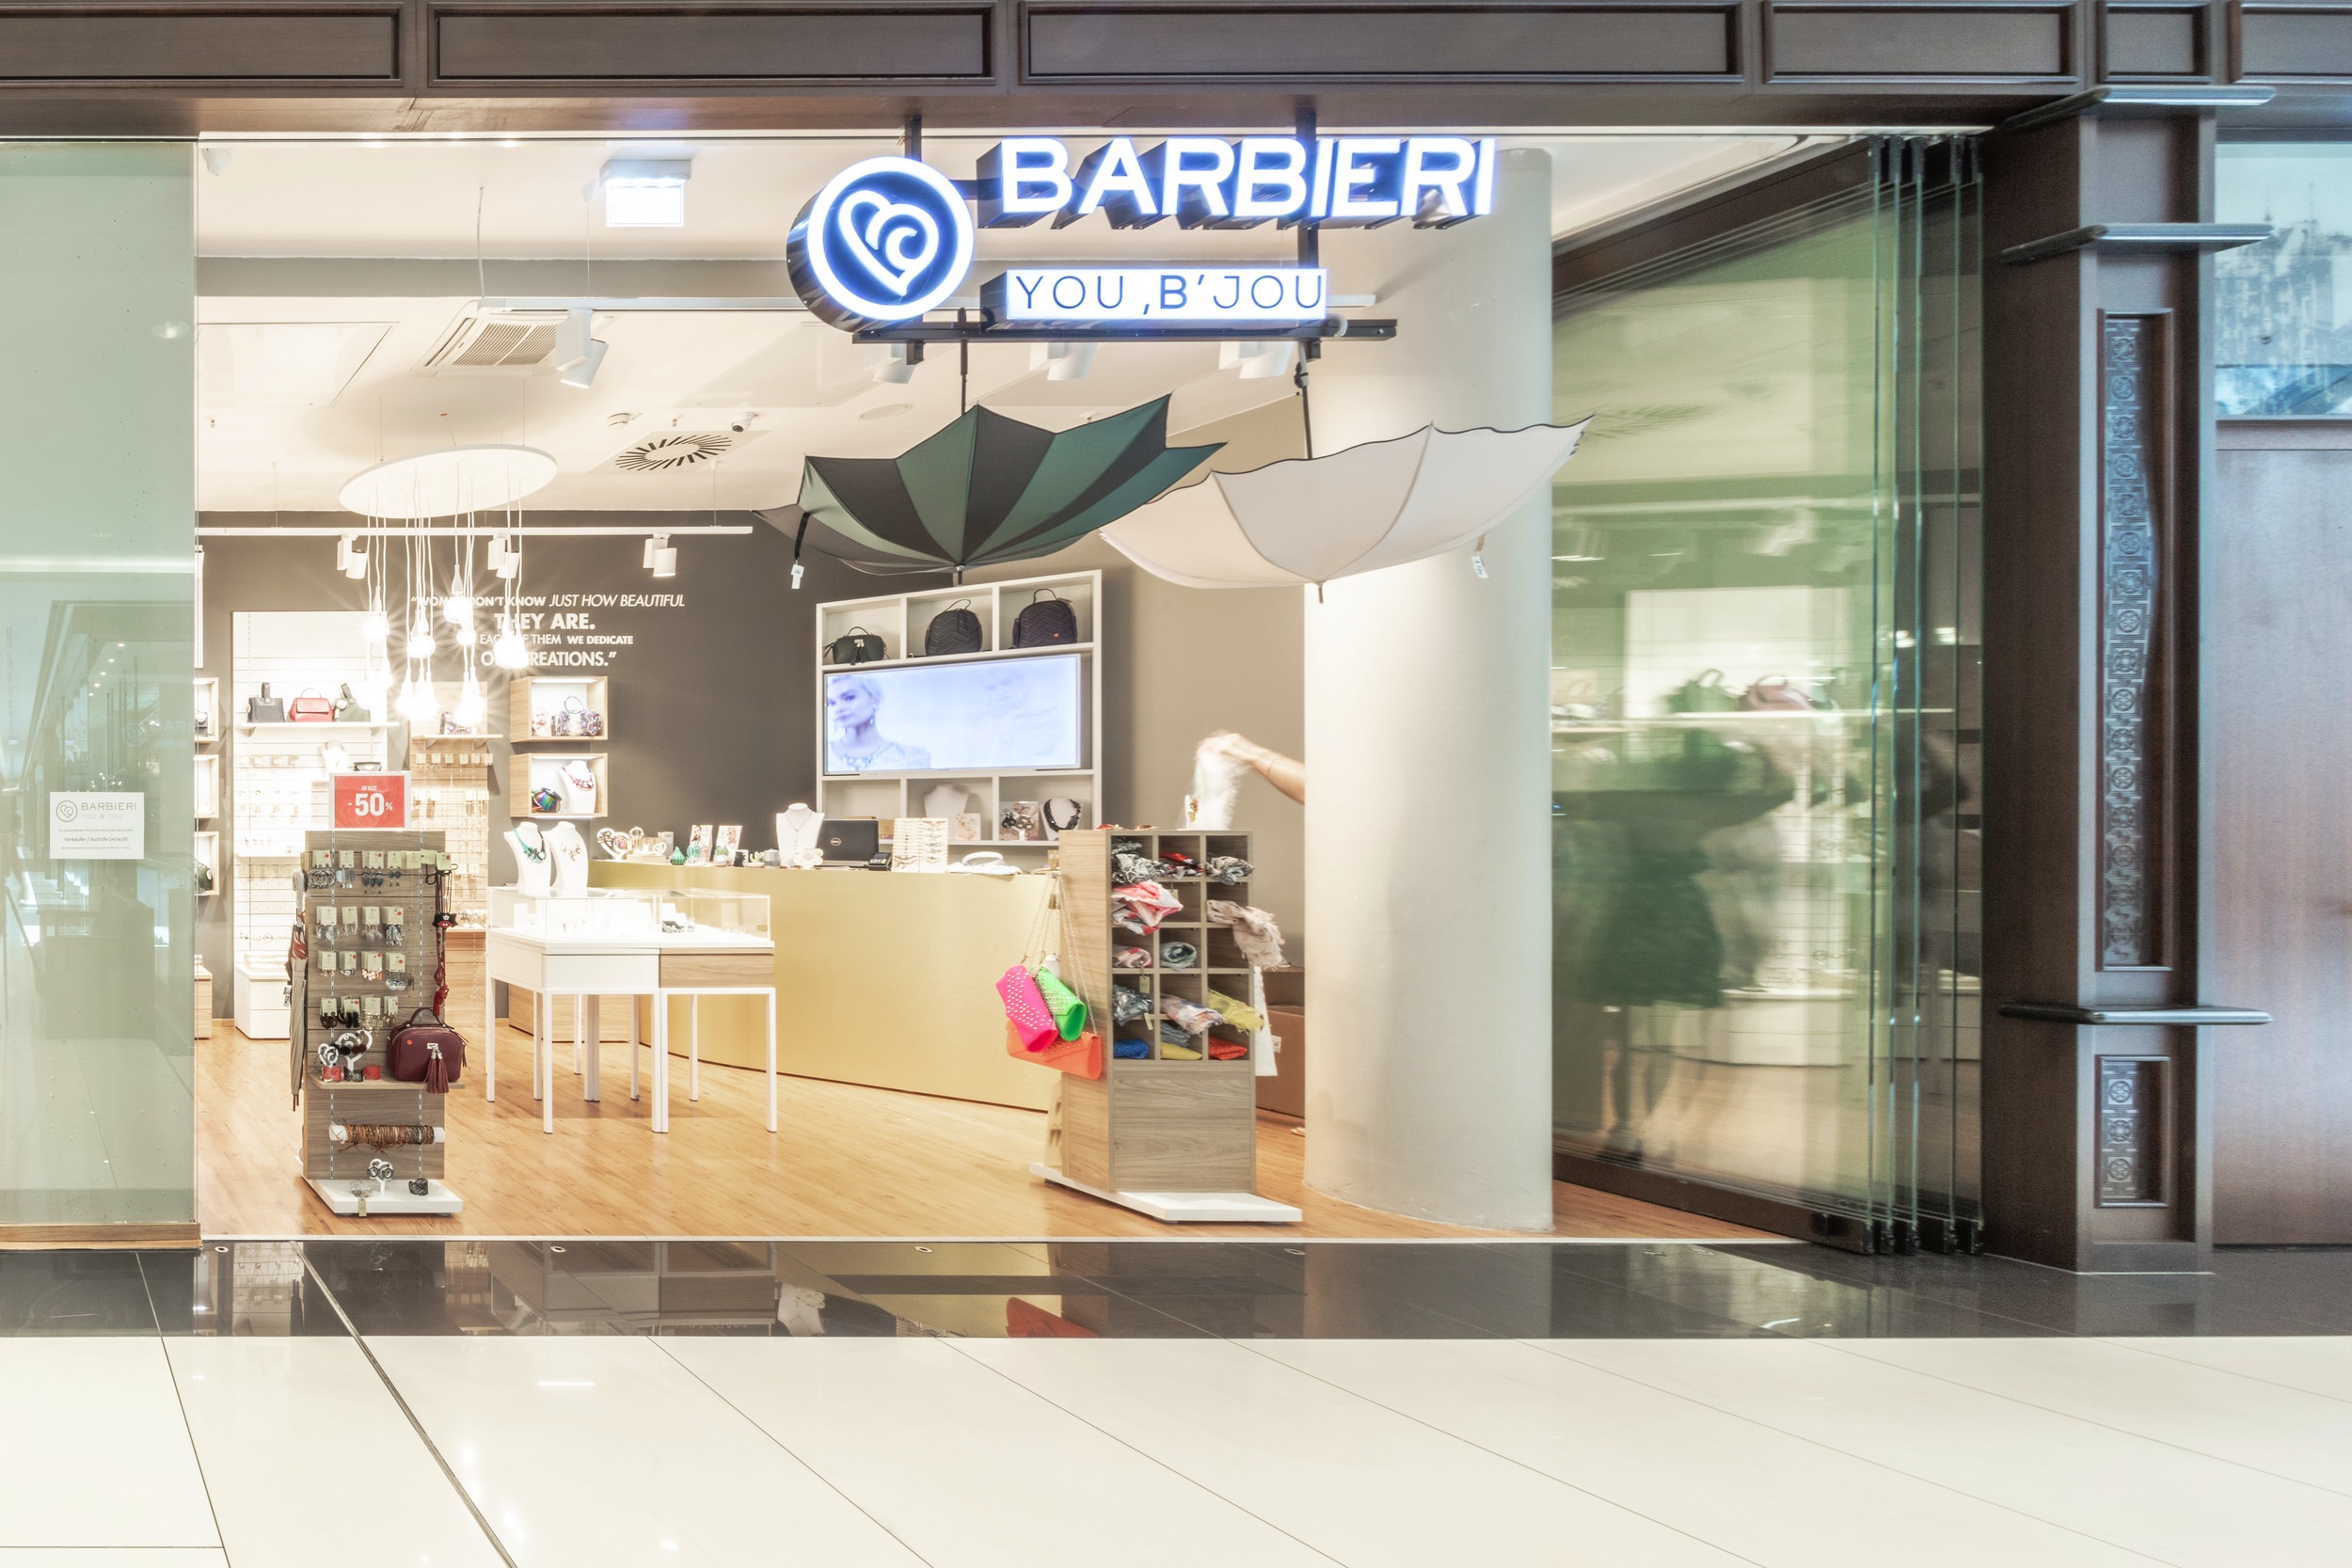 Barbieri at the Mall of Berlin